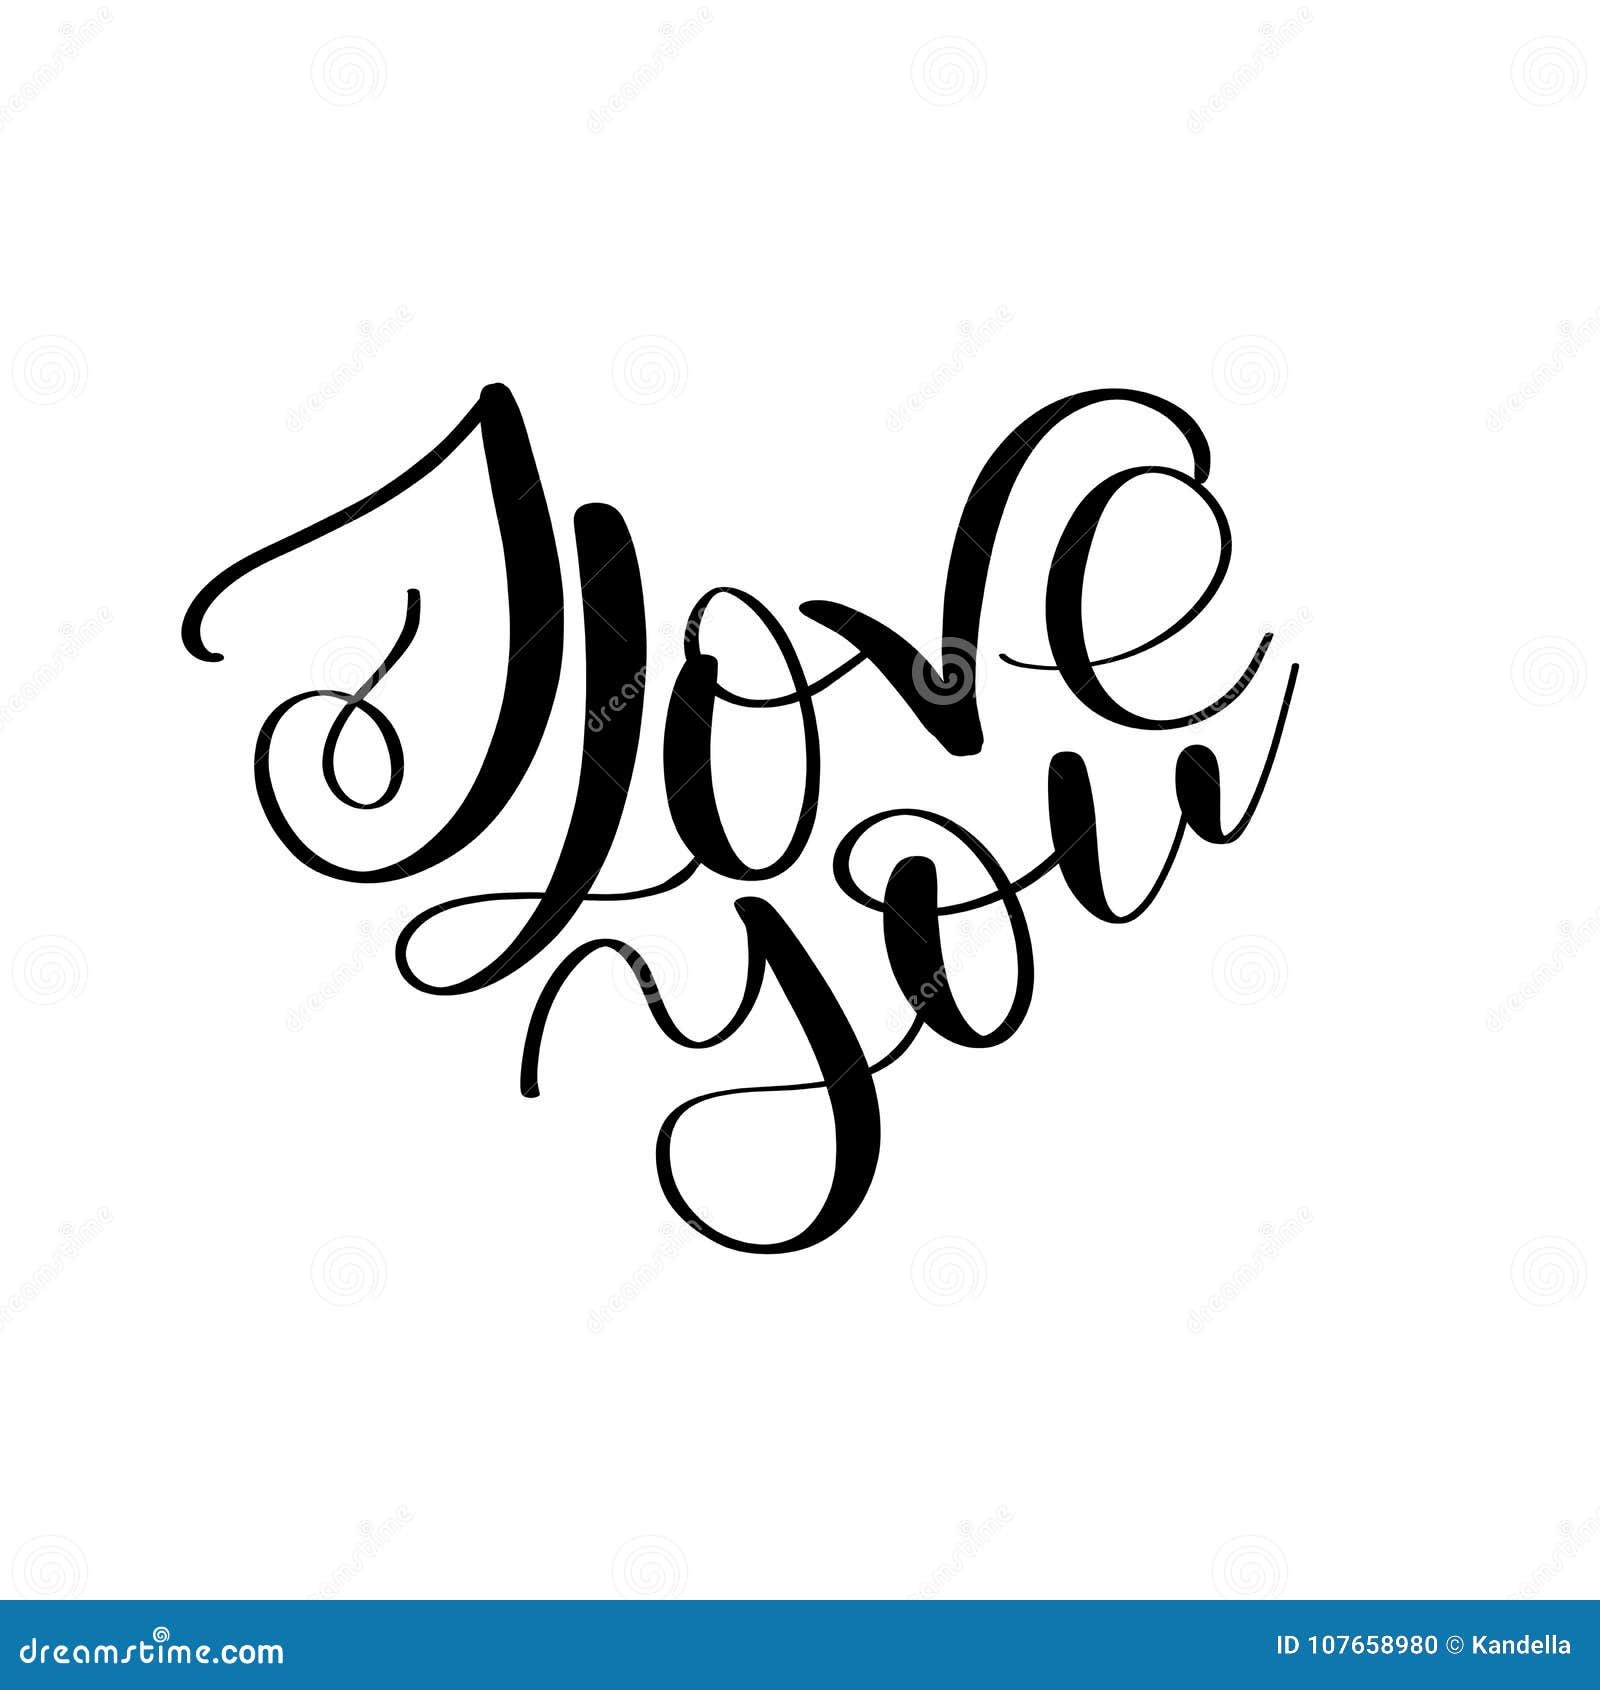 I LOVE you text in heart stock vector. Illustration of vector - 107658980